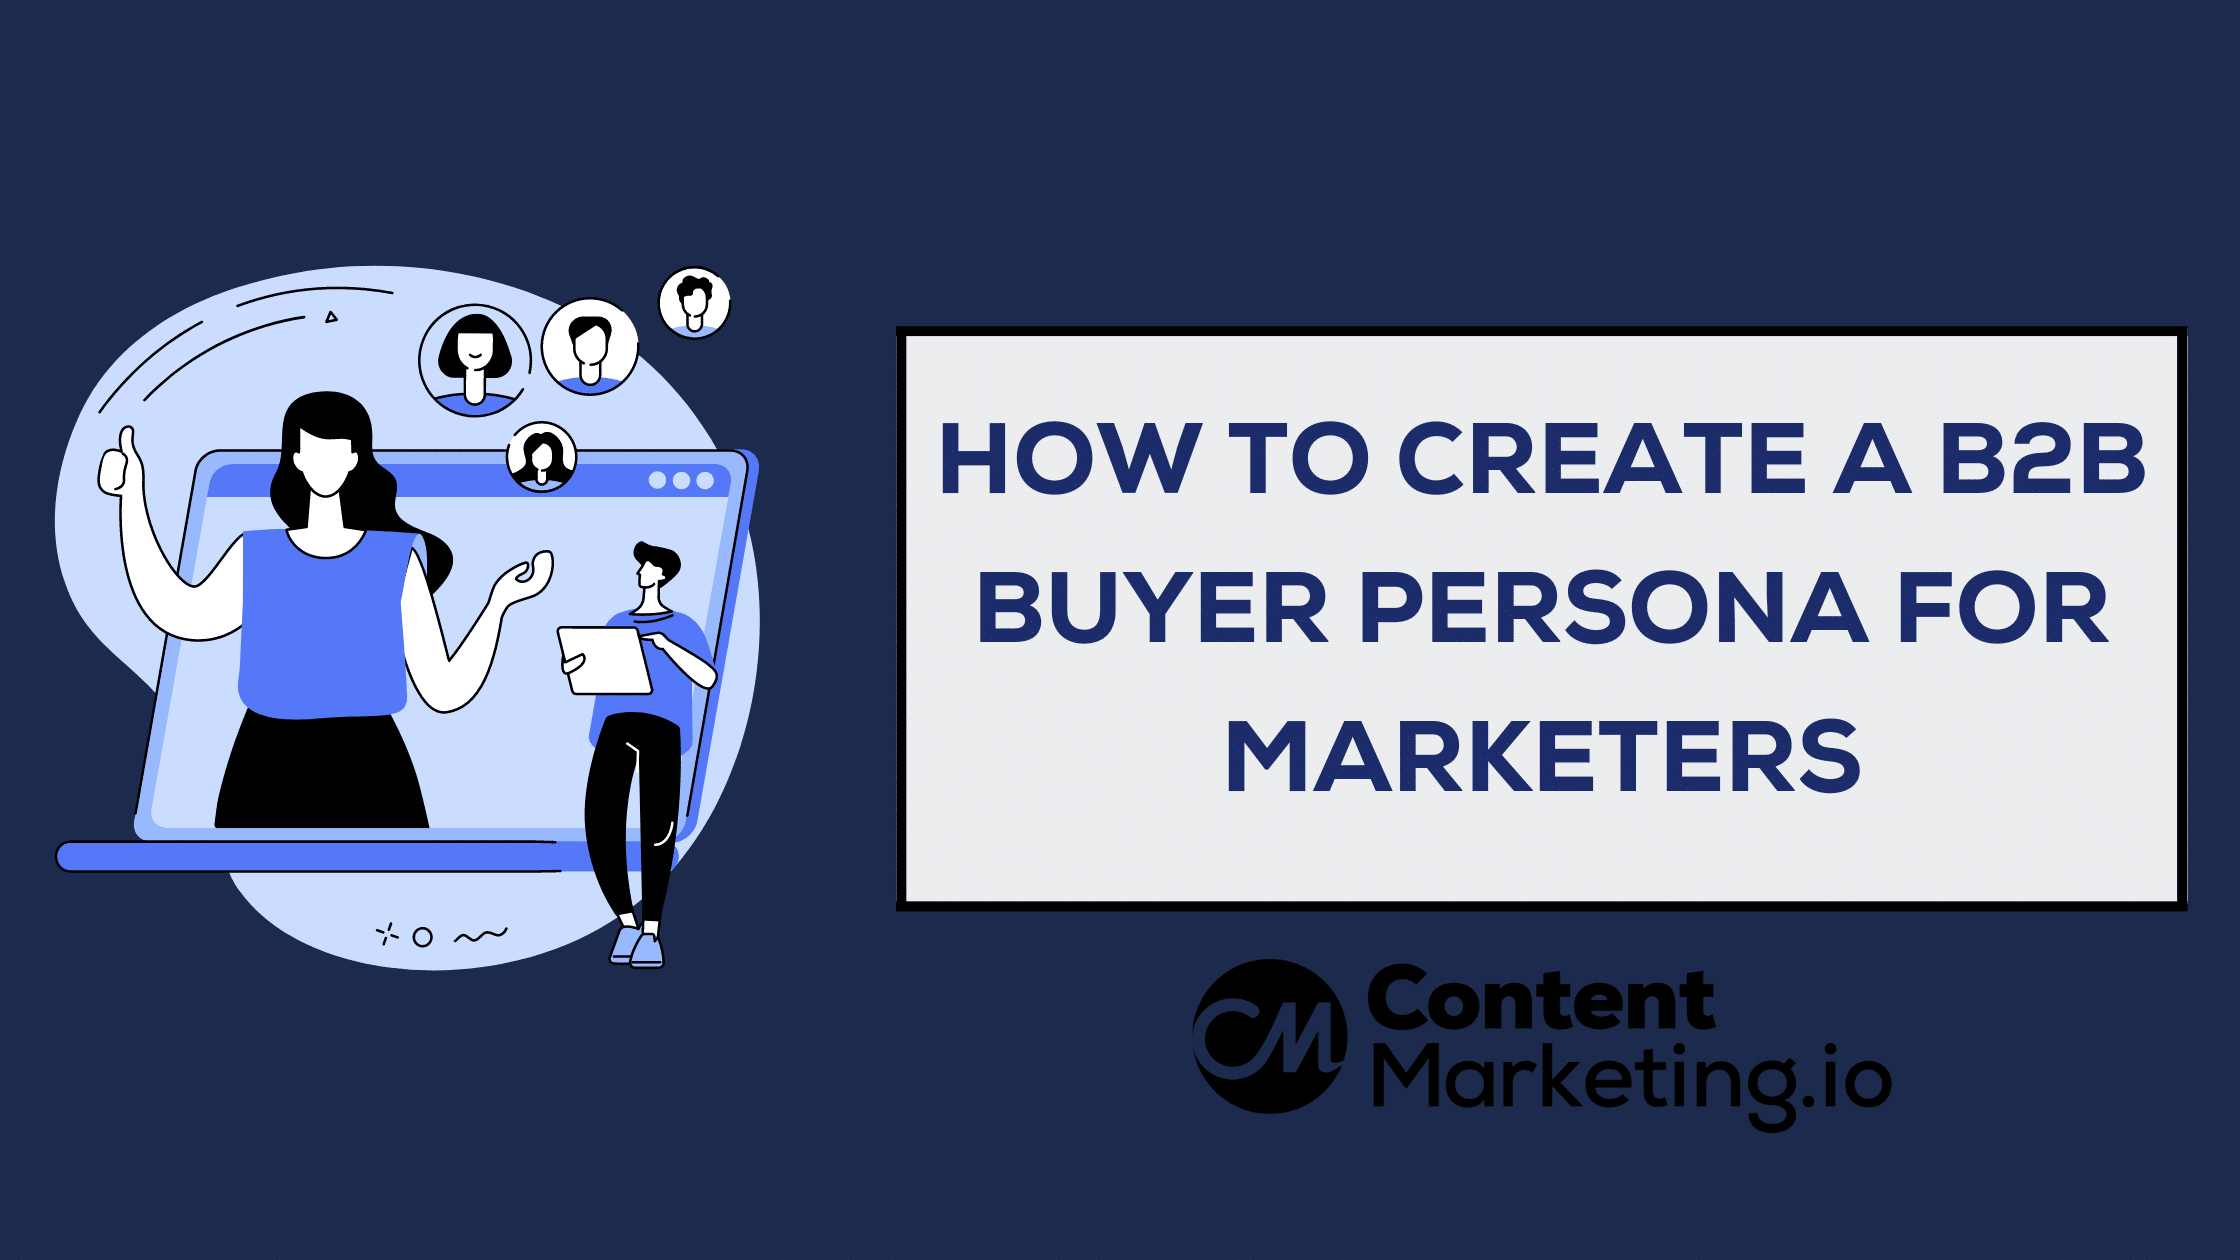 How To Create a B2B Buyer Persona For Marketers